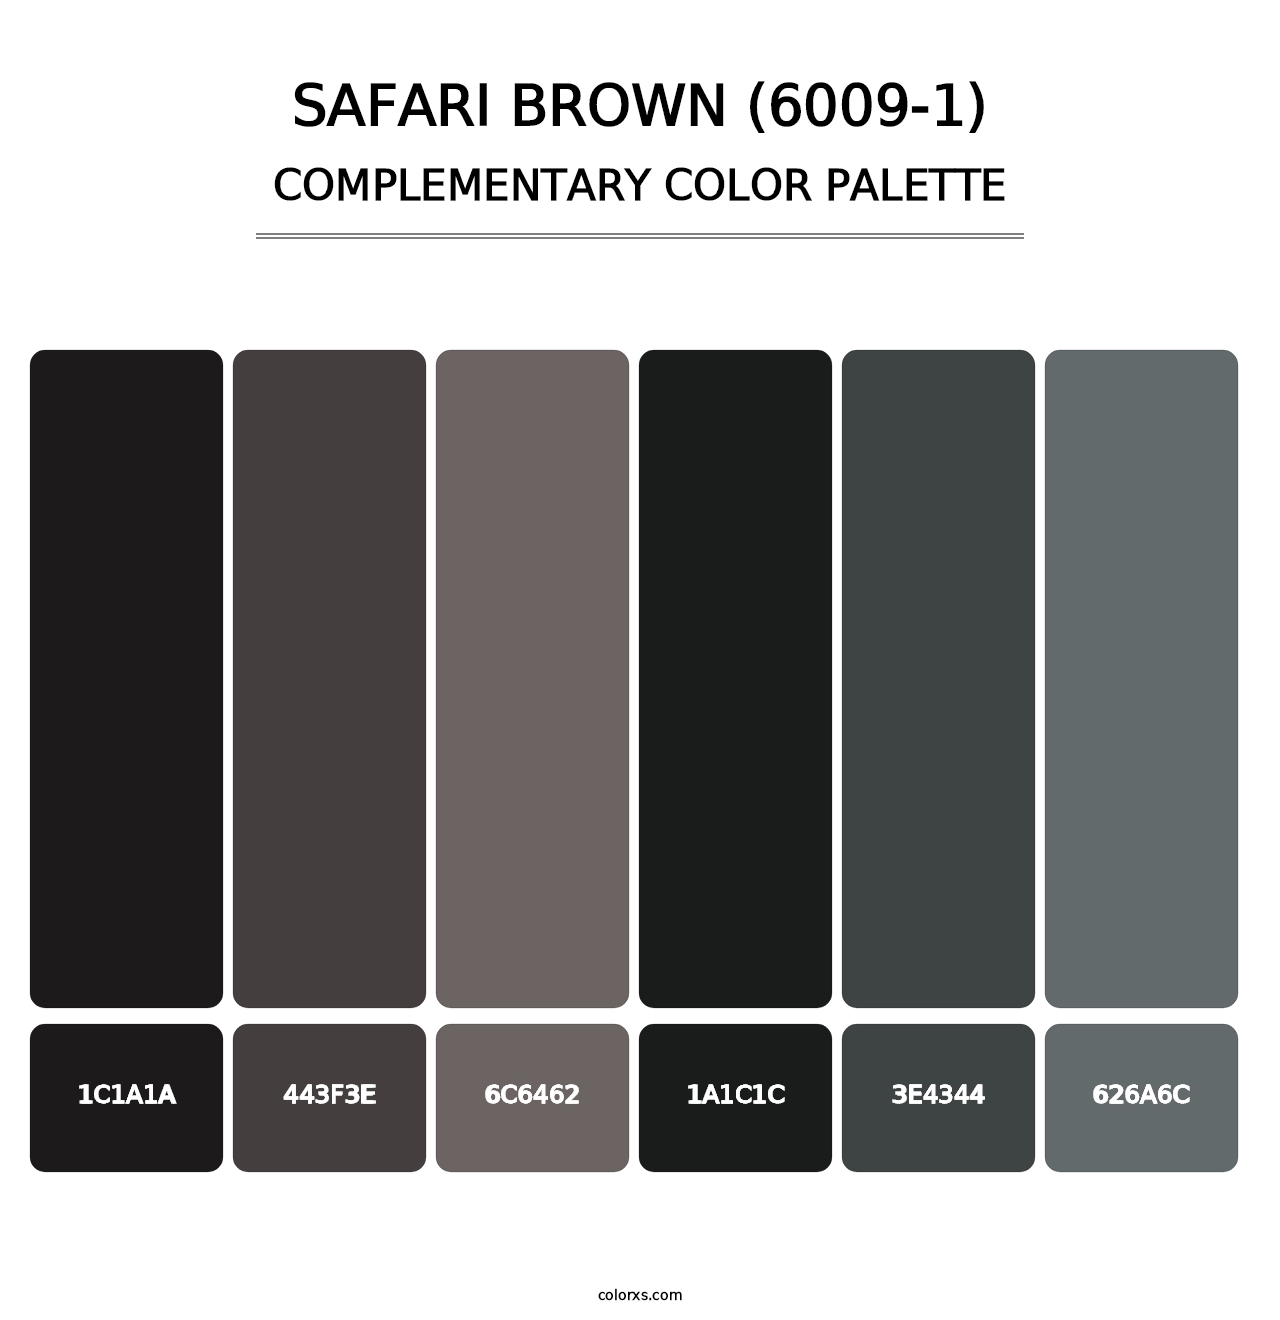 Safari Brown (6009-1) - Complementary Color Palette